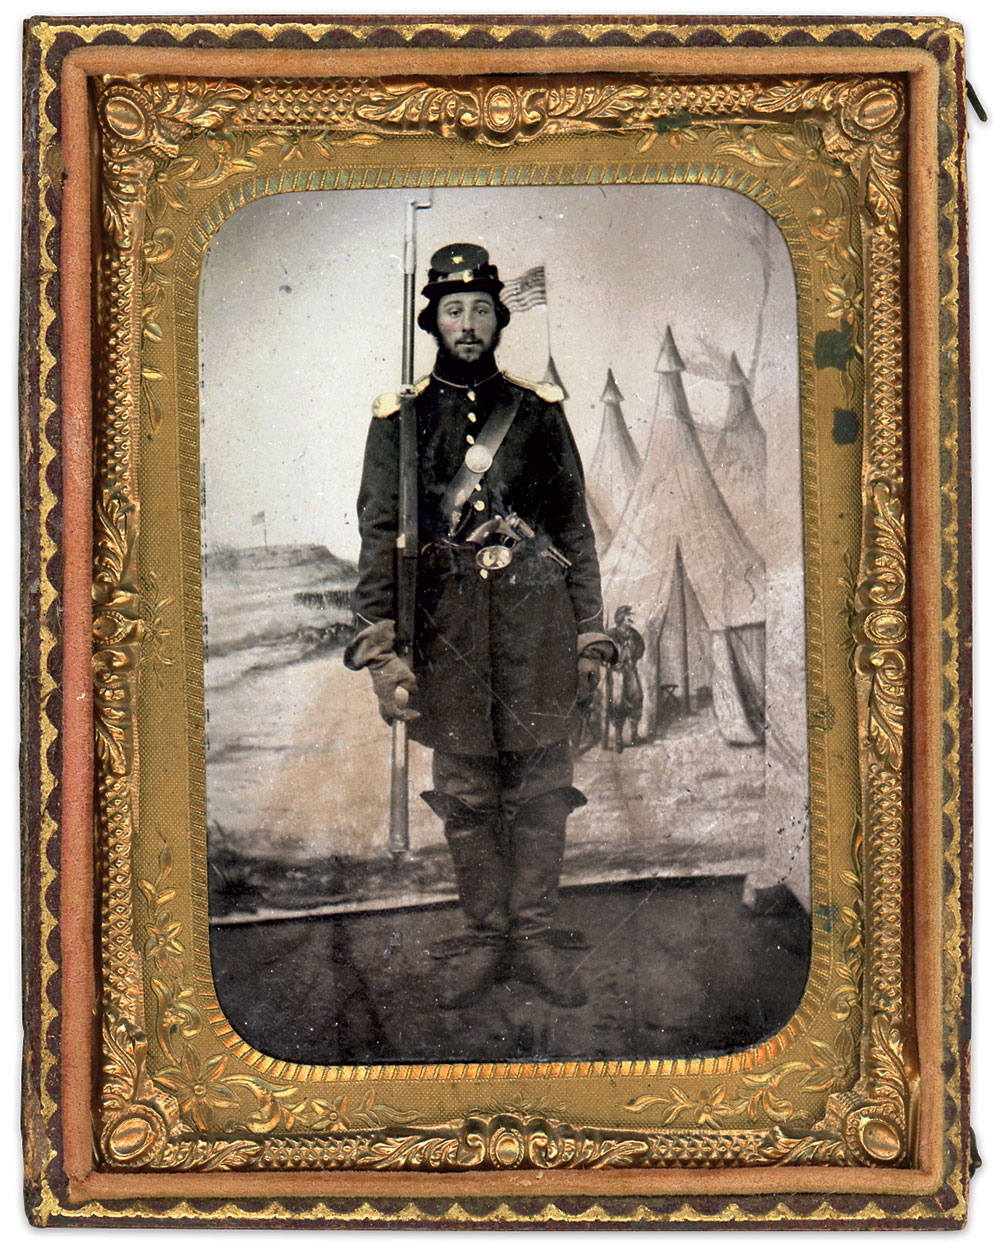 Quarter plate tintype by an unidentified photographer. Frank Graves Collection.